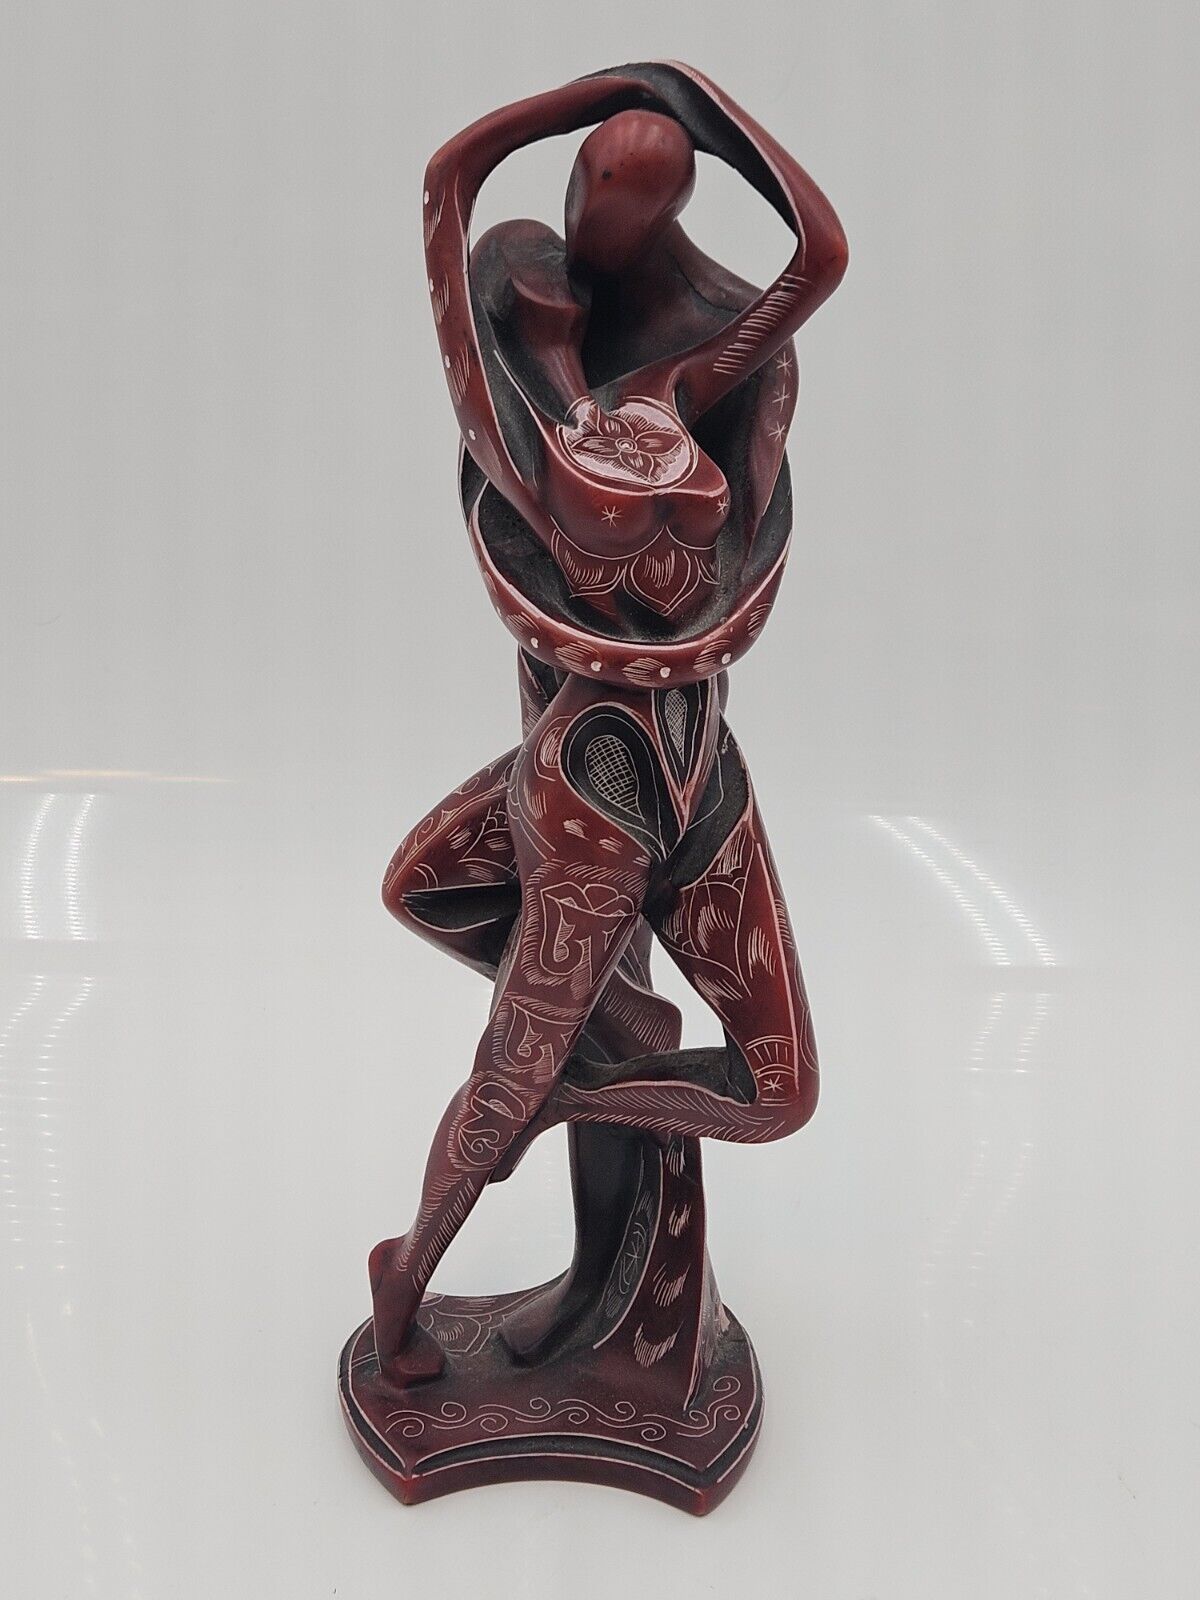 Stunning Sculpture Of A Man And Woman Embraced And Painted Figurine 12 Inch 